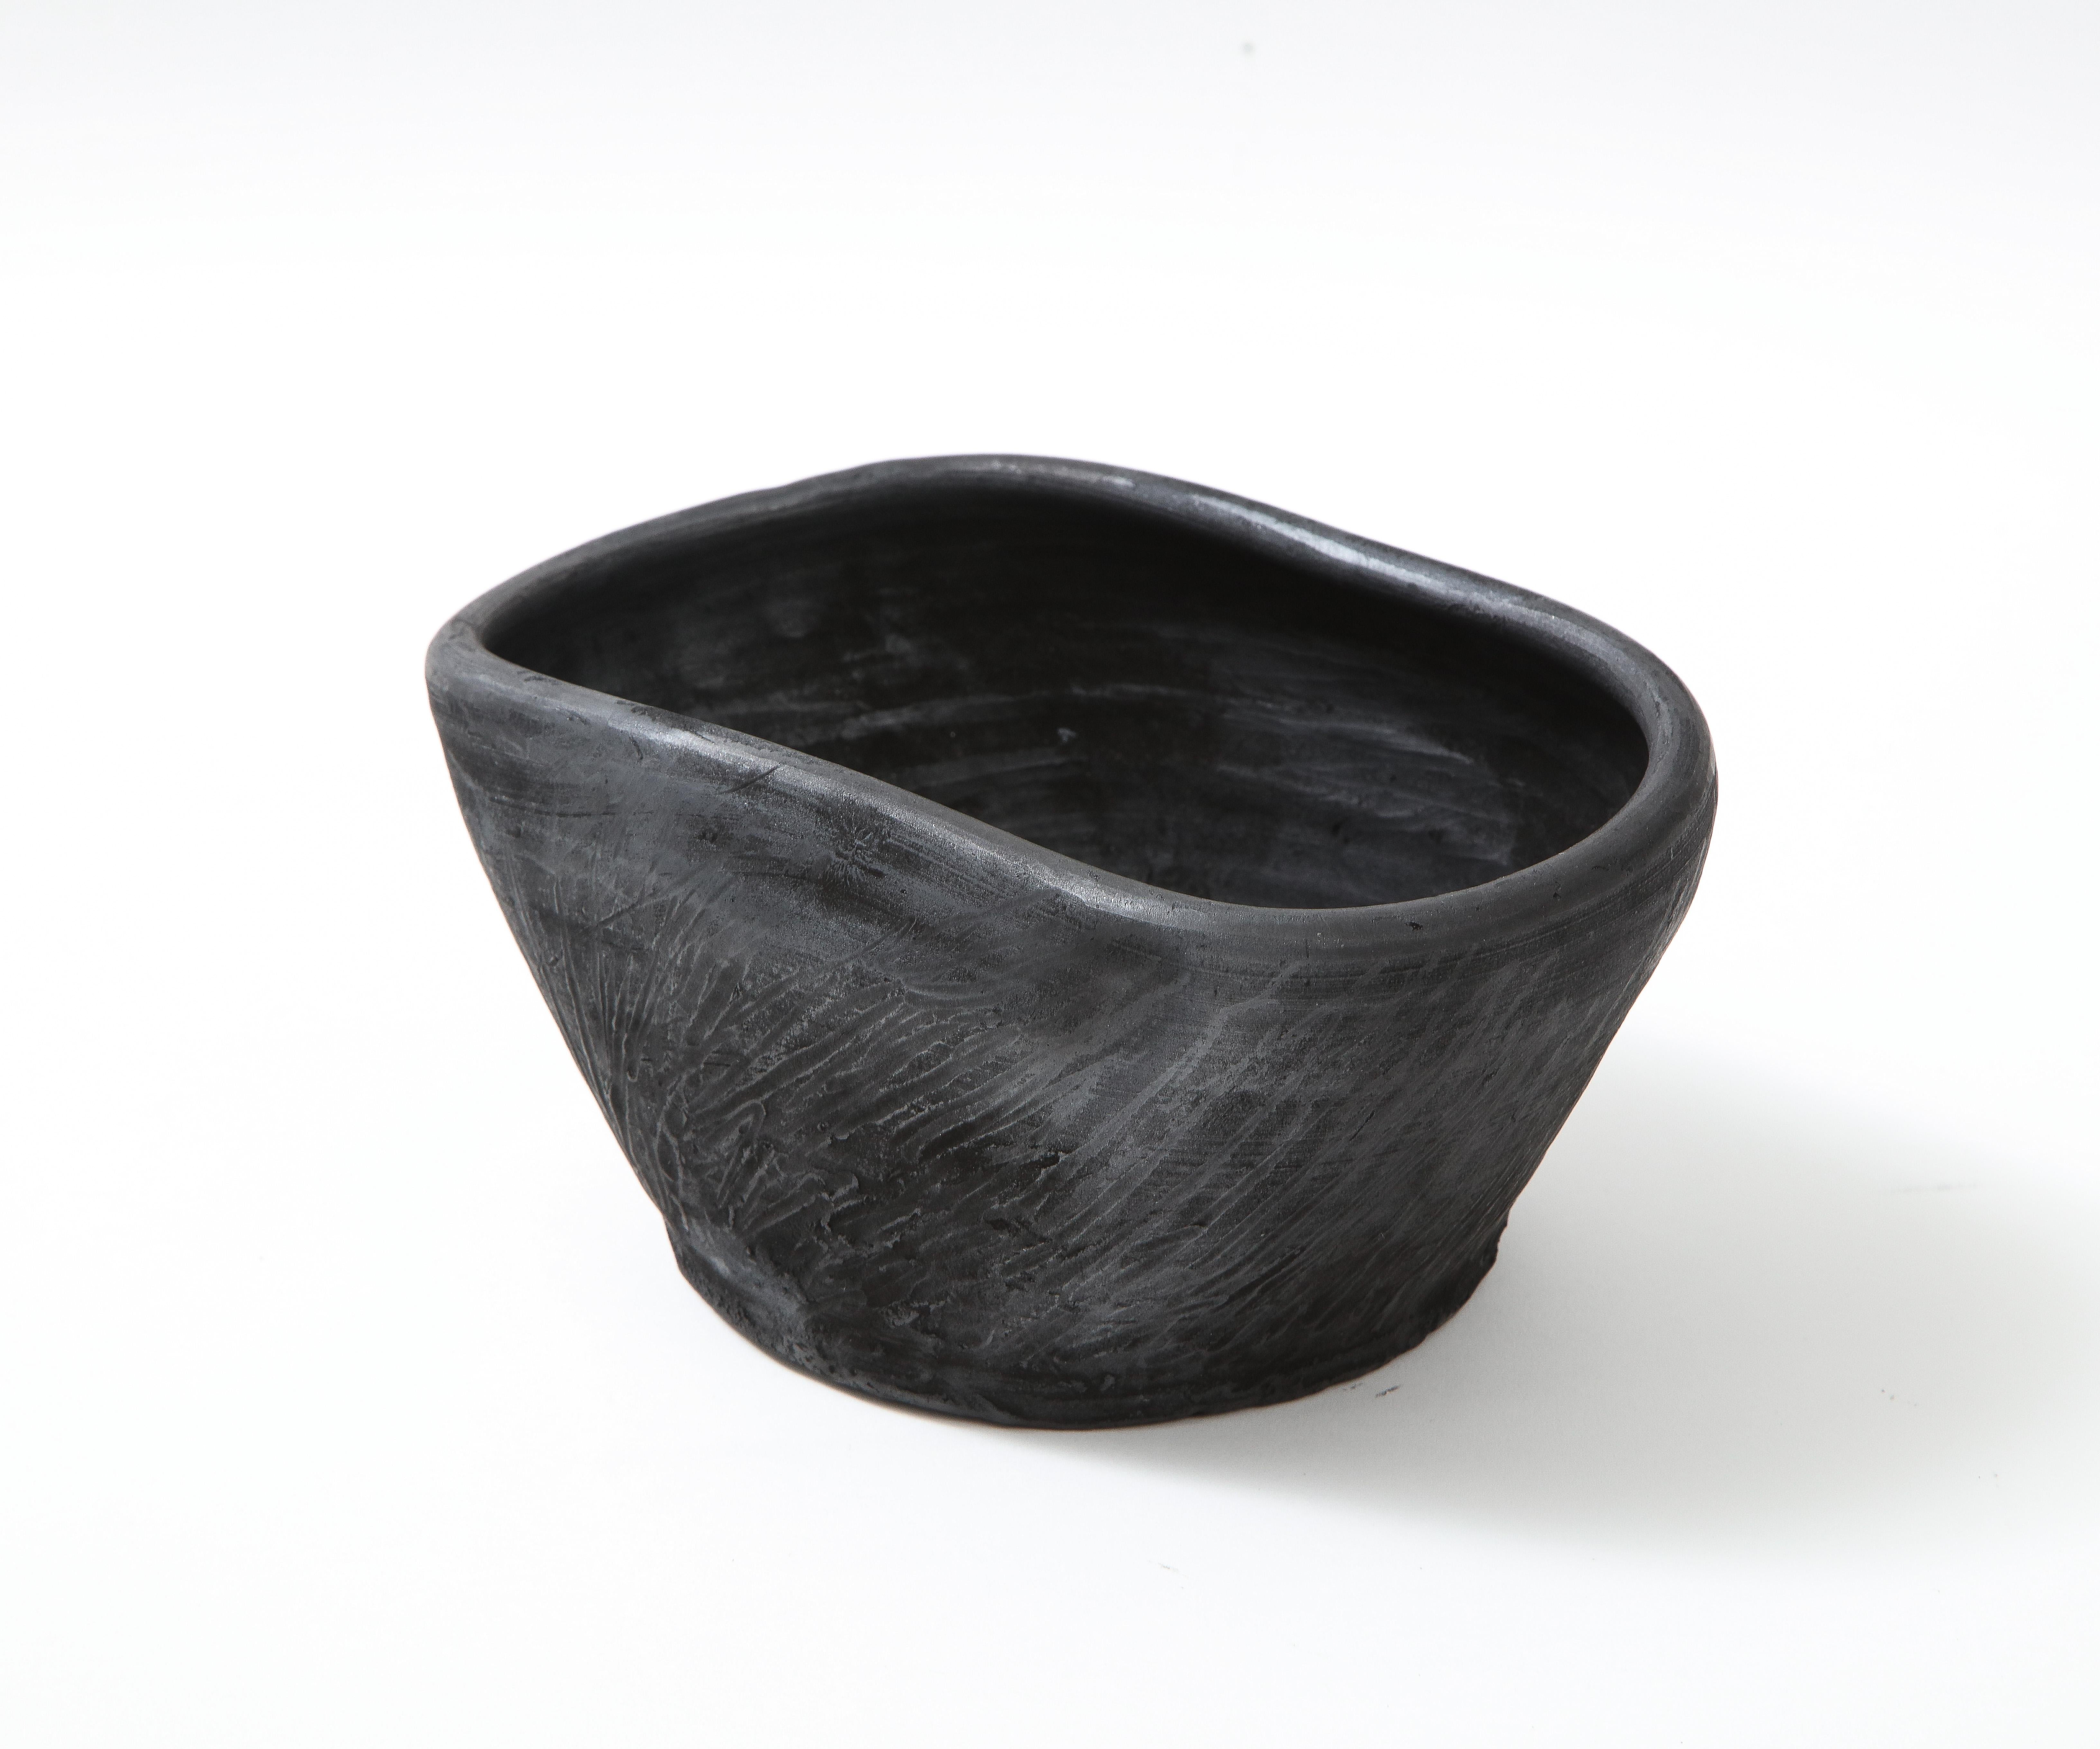 Brutalist terracotta bowl. Uniquely cooked directly on charcoal. Made exclusively for Facto Atelier Paris. Silver reflections. Not suitable for food contact. Different sizes available.